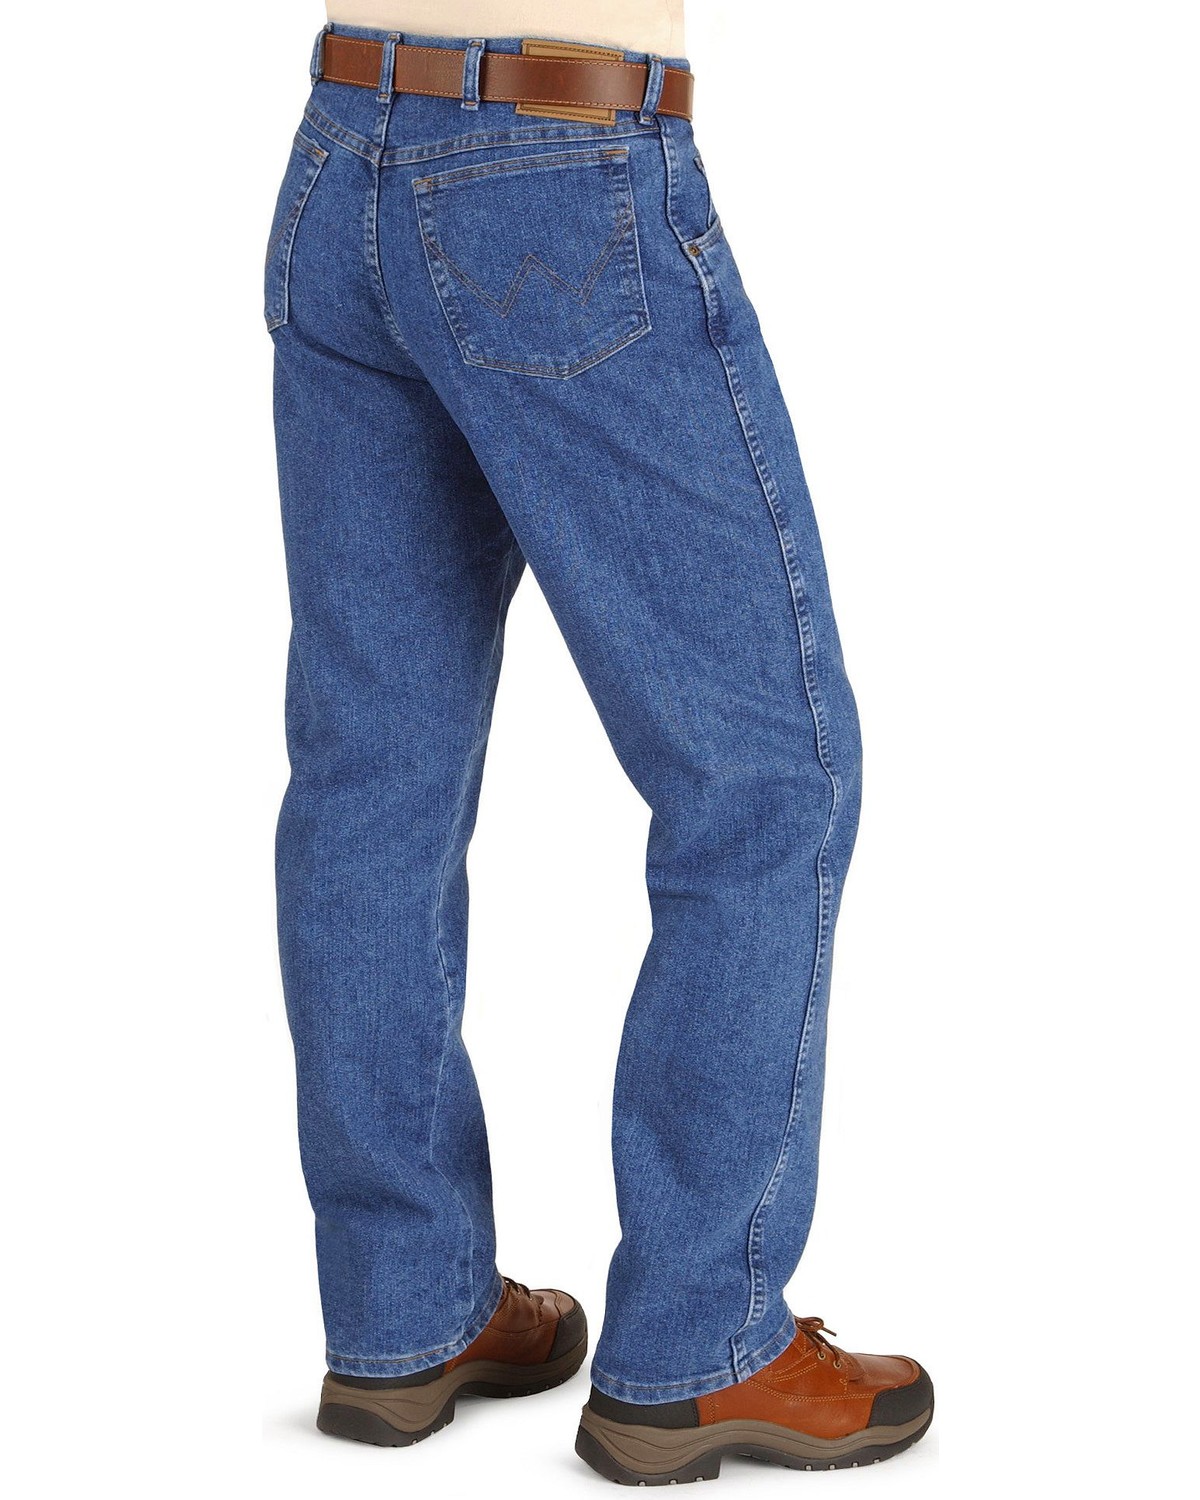 Wrangler Jeans - Rugged Wear Relaxed Fit Stretch - Big 44